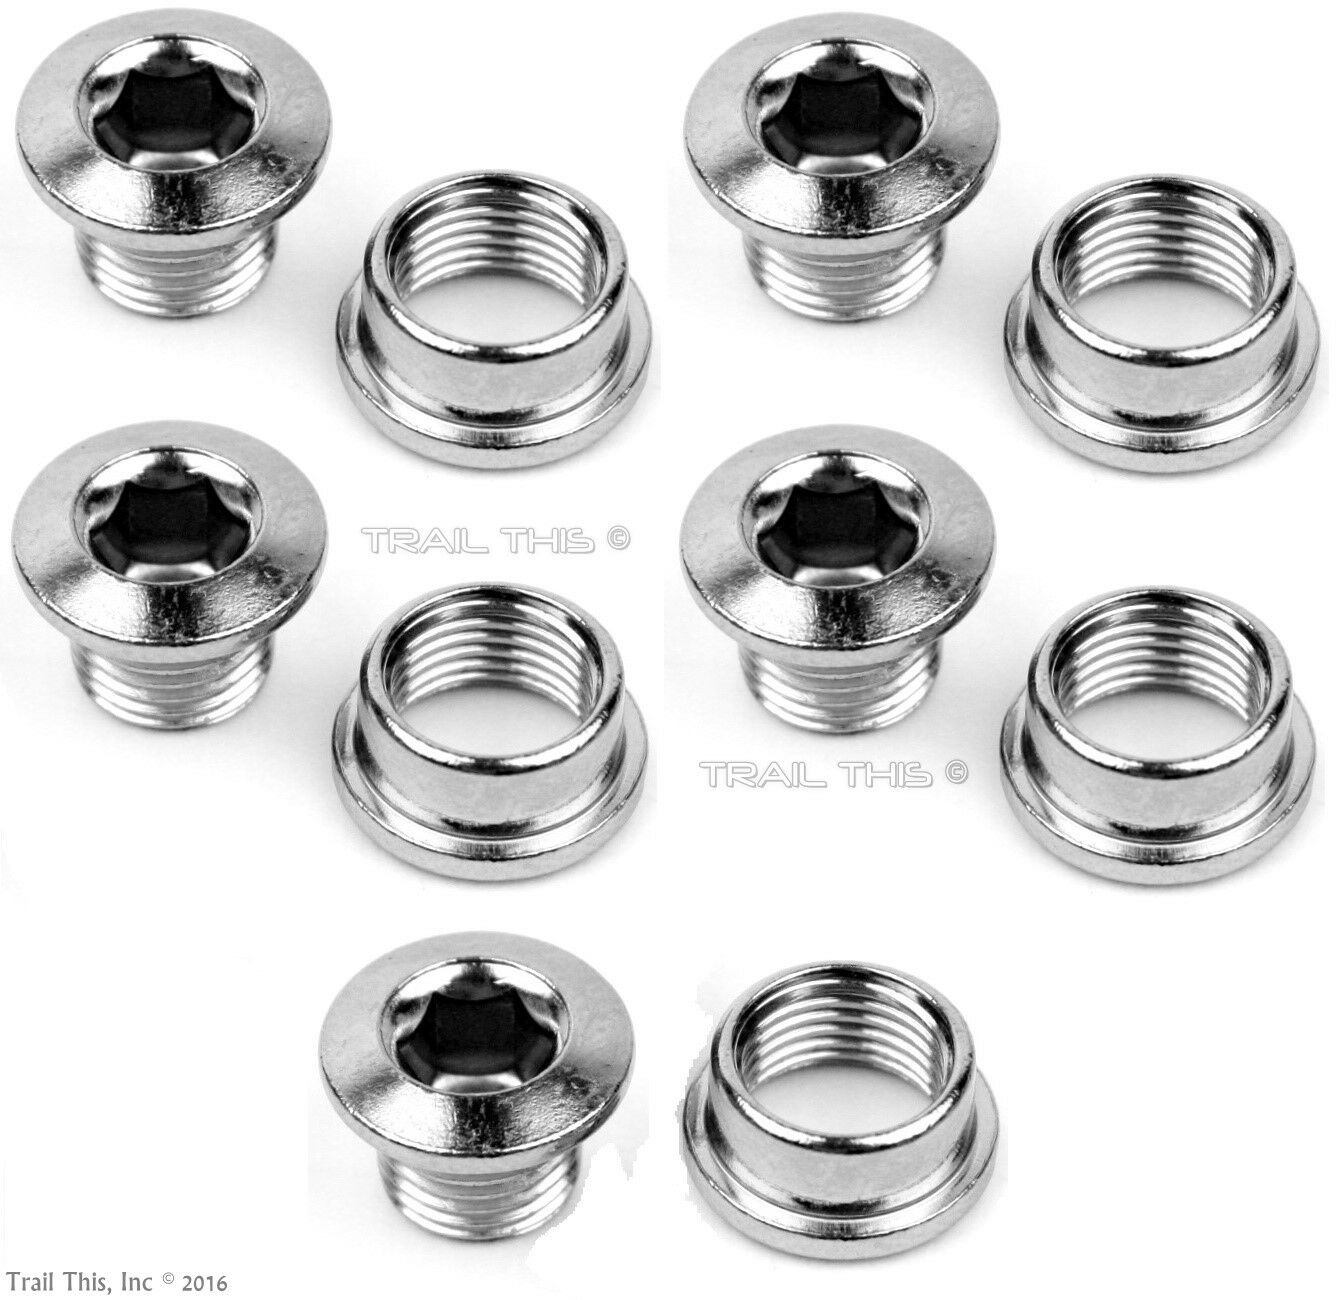 5-count Set Of Origin8 Single-speed Fixed Gear Bmx Track Chainring Bolts Chrome